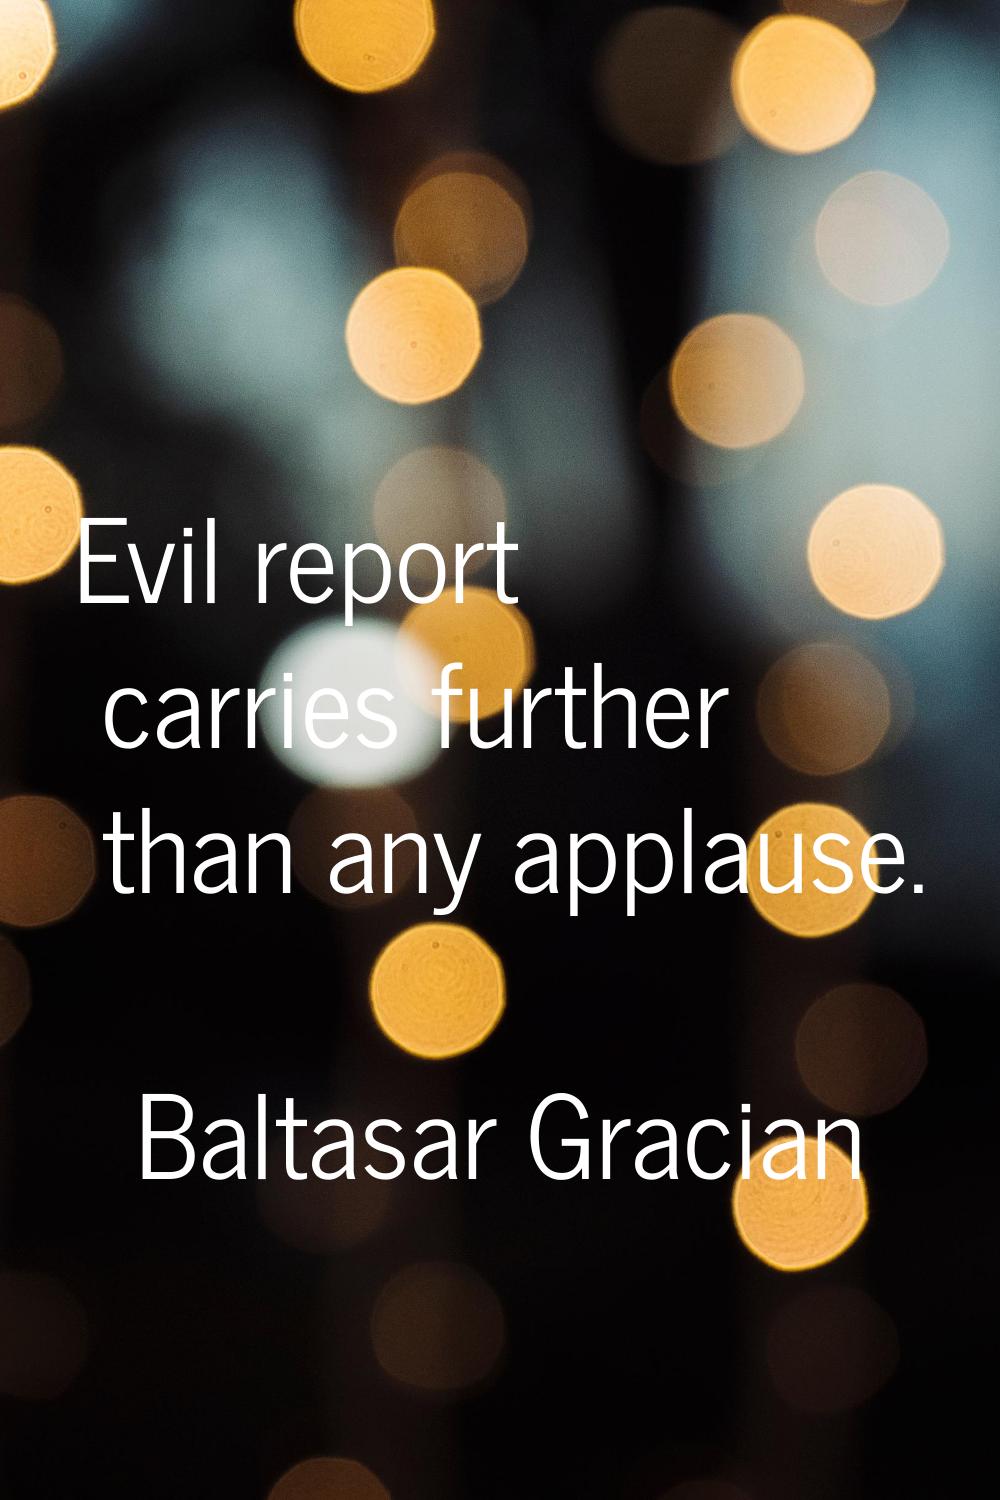 Evil report carries further than any applause.